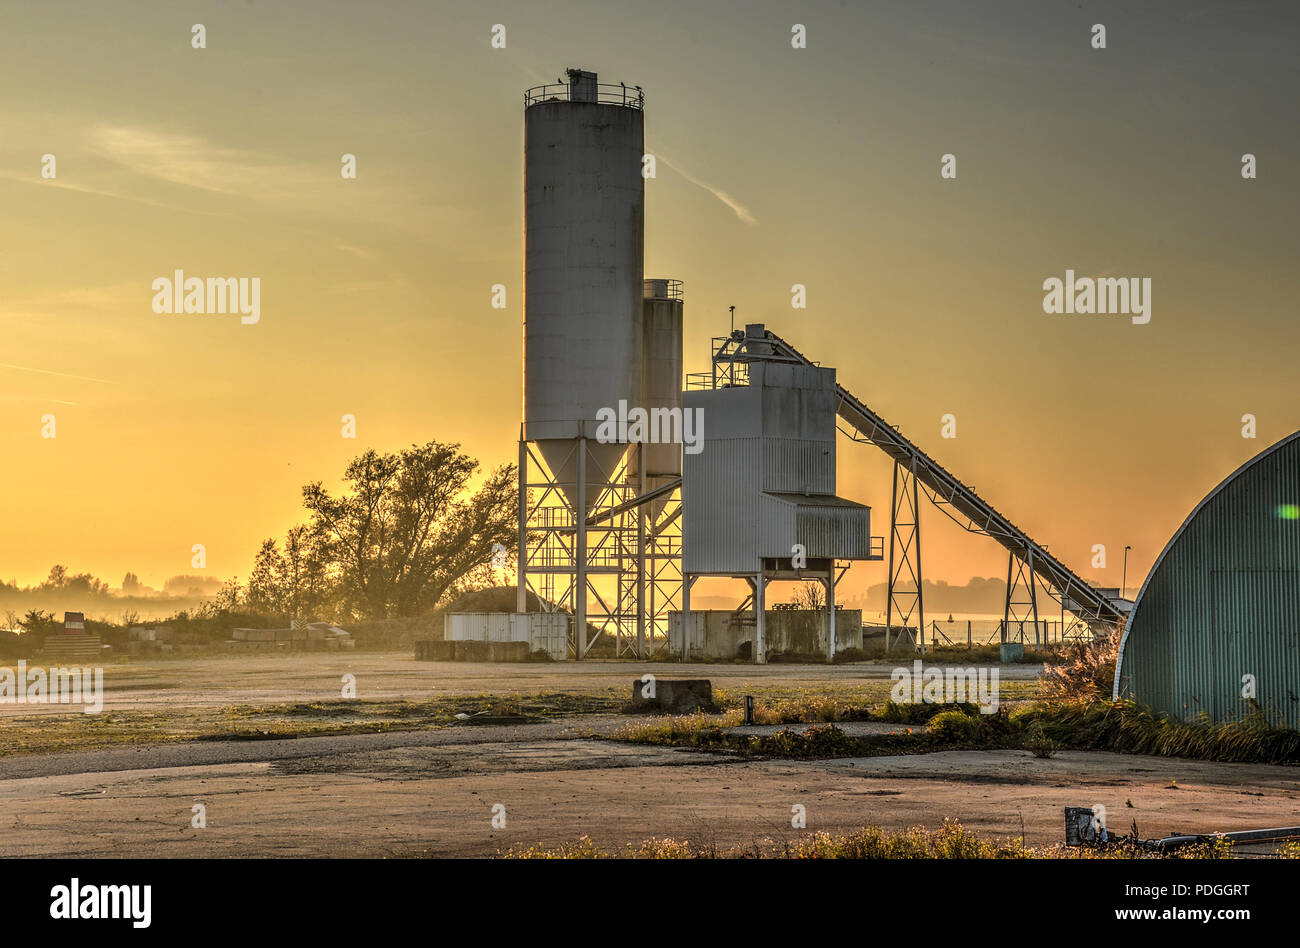 Barendrecht, The Netherlands, November 1, 2015: Small grainsilo at the bank of the Oude Maas river at sunset Stock Photo